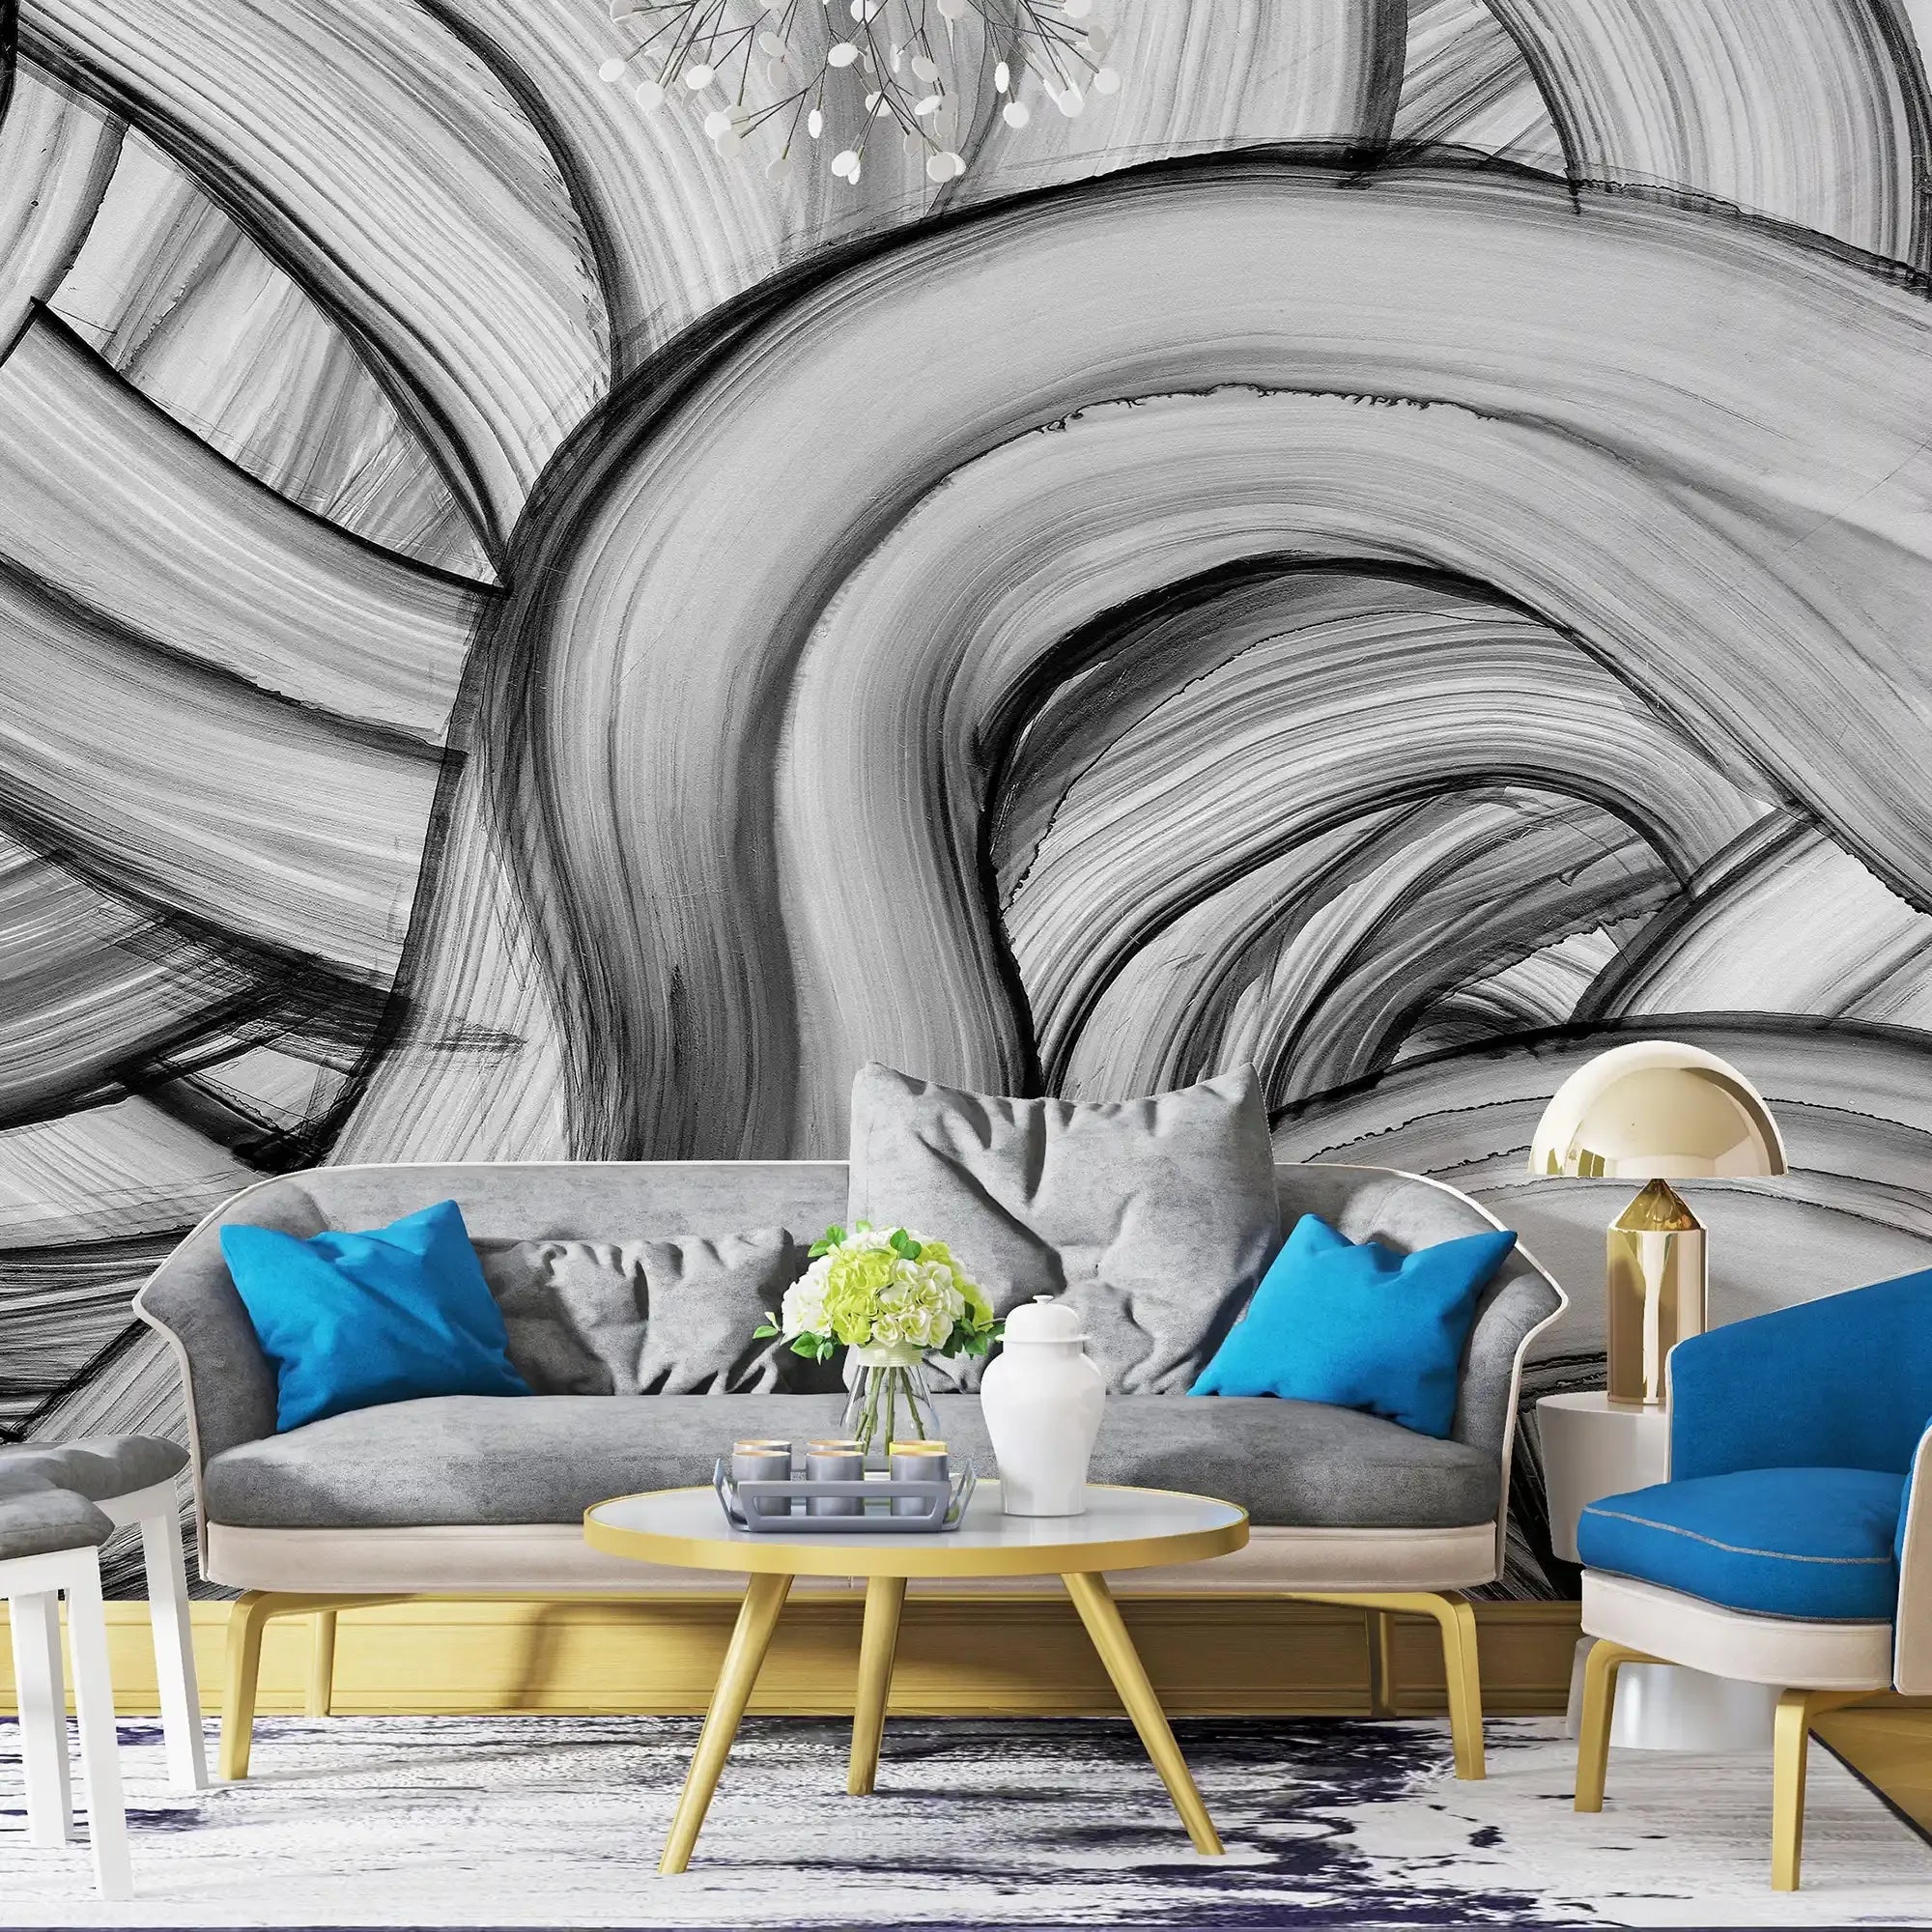 3092-F / Peelable Stickable Wallpaper with Colorful Wavy Lines - Bold, Contemporary Geometric Design for Any Room - Artevella